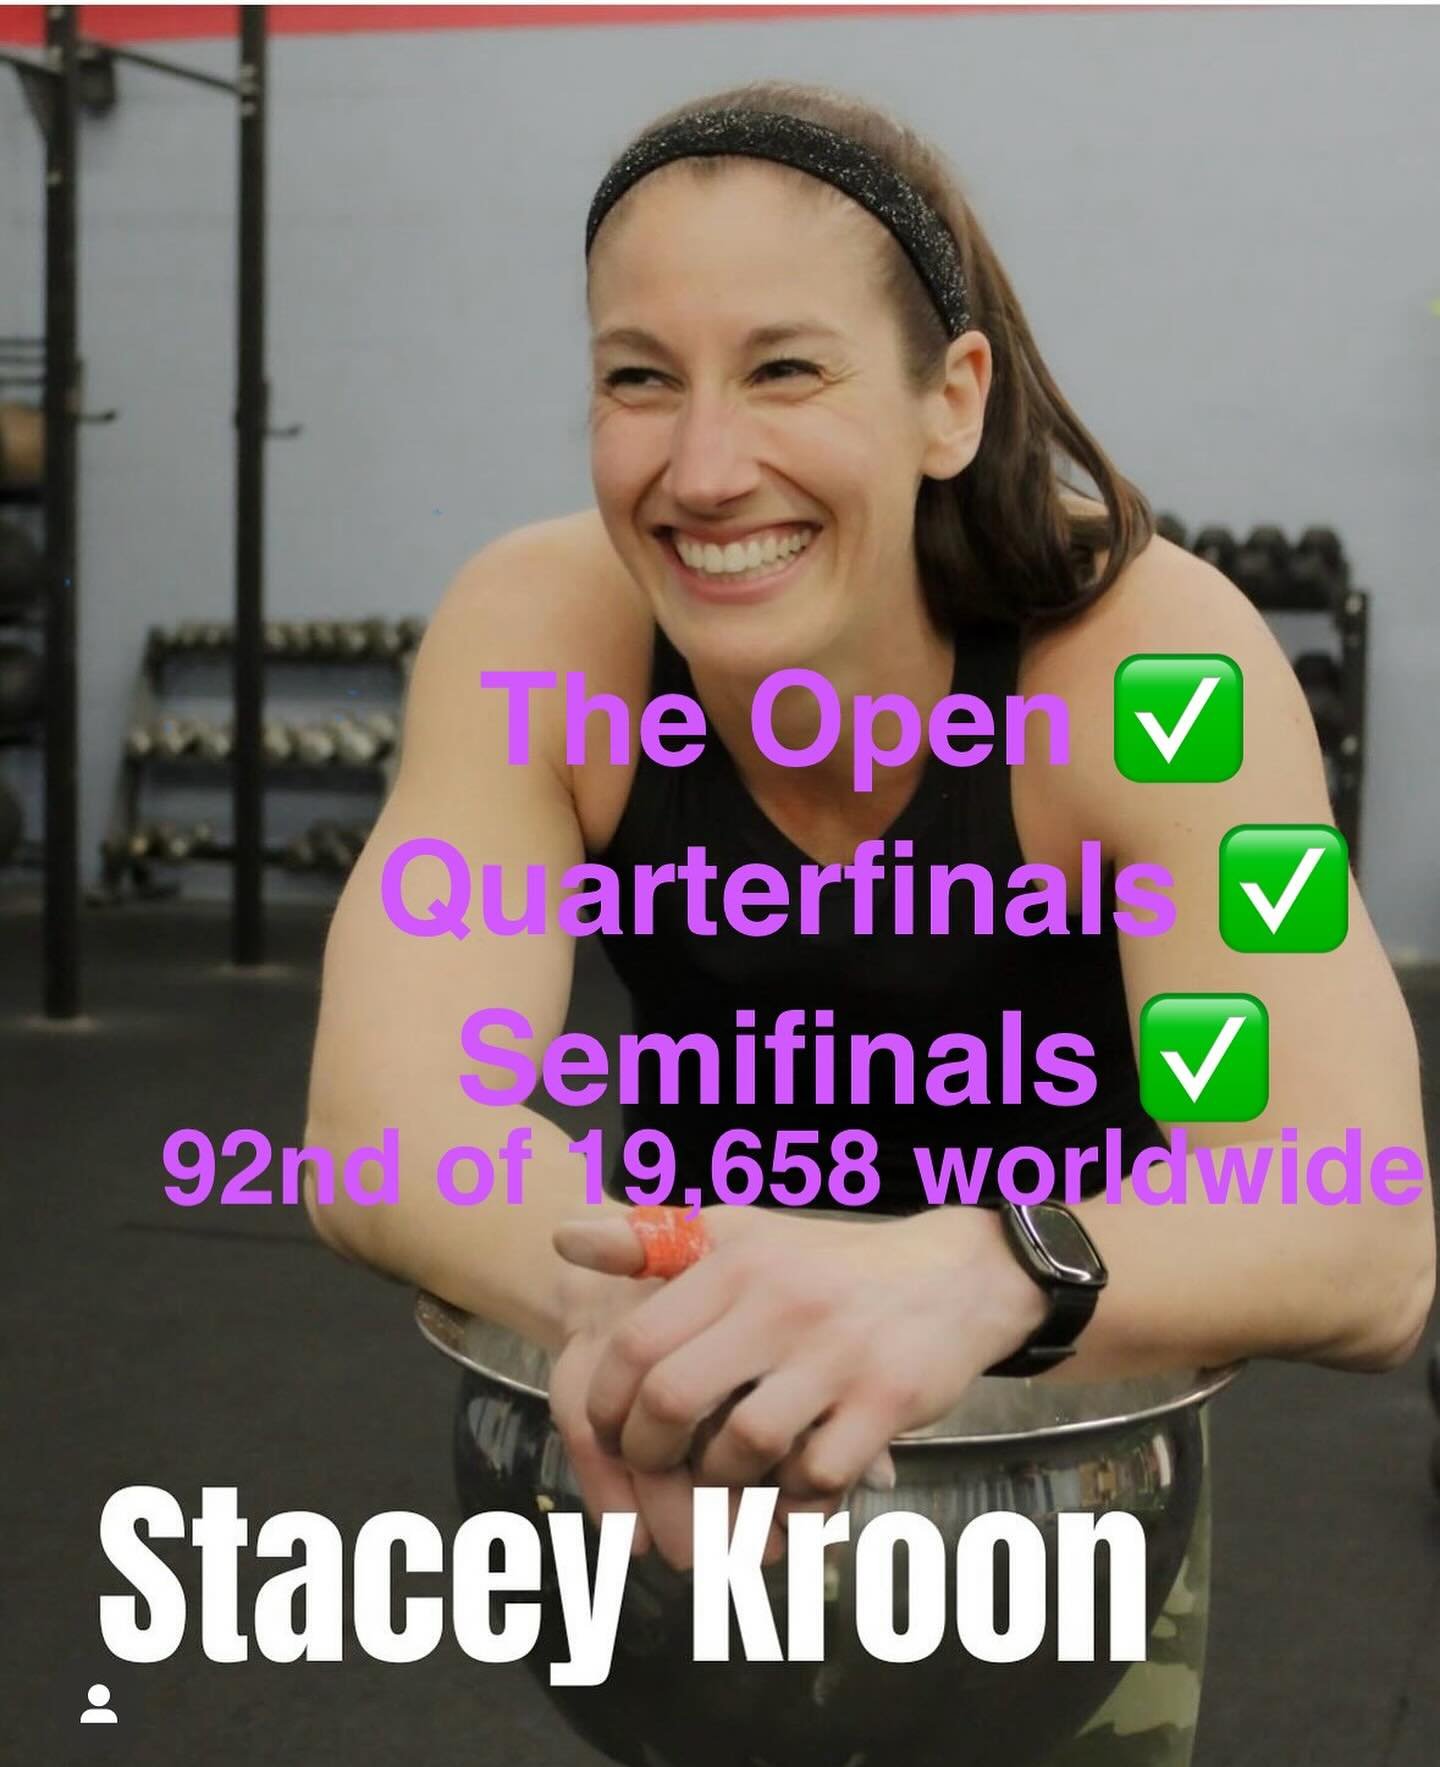 🌟 **Incredible Achievement Alert at Monument Fitness!** 🌟

We are thrilled to celebrate two of our amazing athletes, Jim Mello and Stacey Kroon, who made our whole fit community proud by qualifying for and competing in the CrossFit Games Semifinals